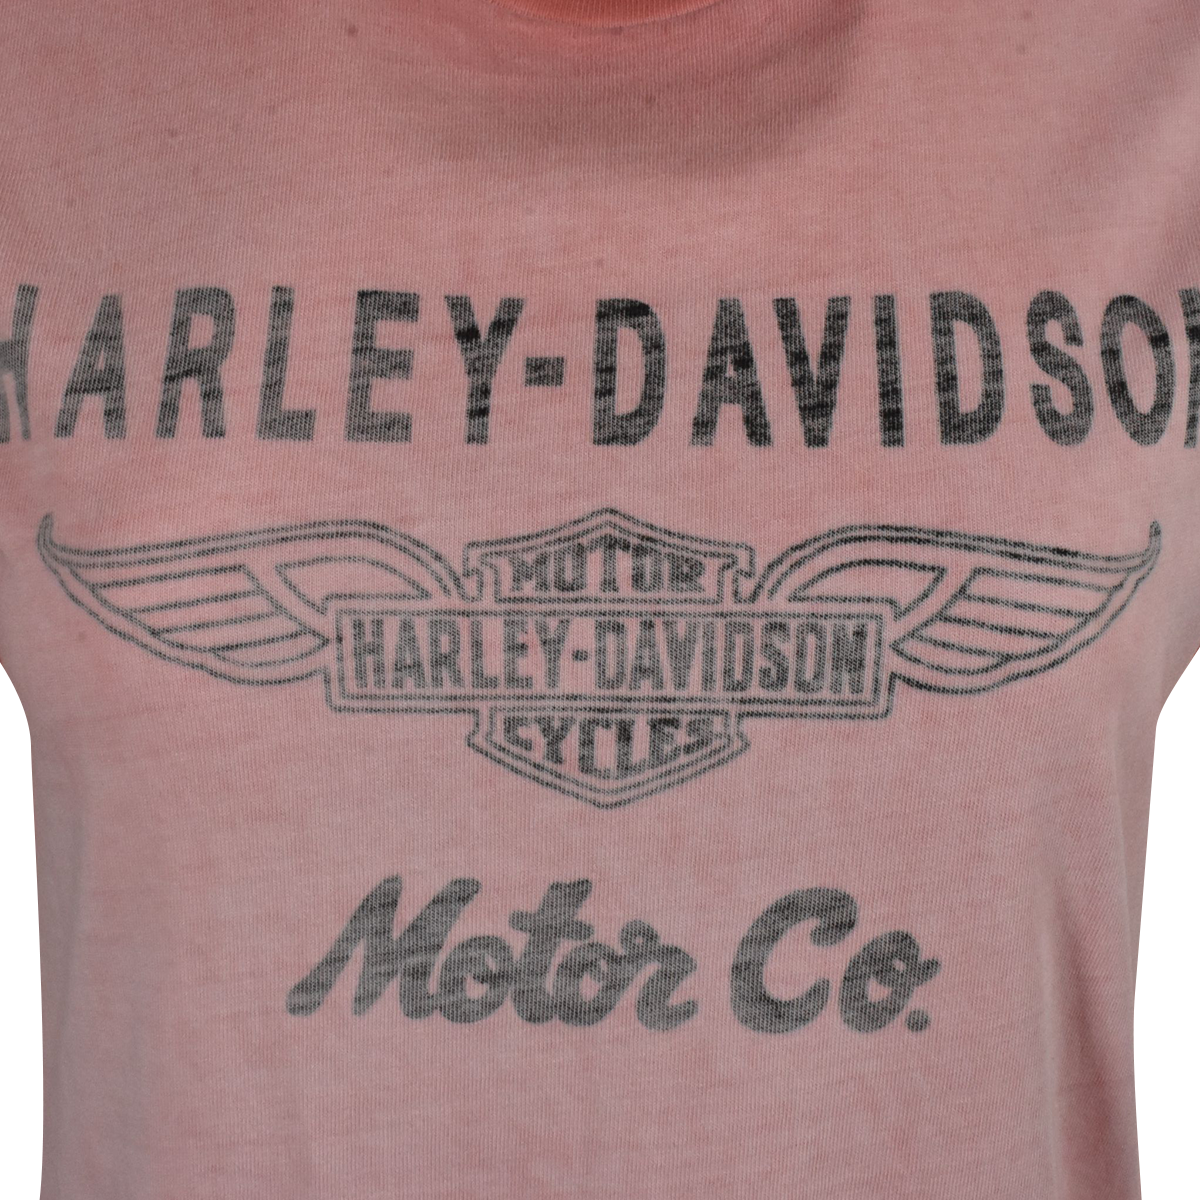 Harley-Davidson Women's T-Shirt Pink Antique Street Faded Inside Out Print (S11)